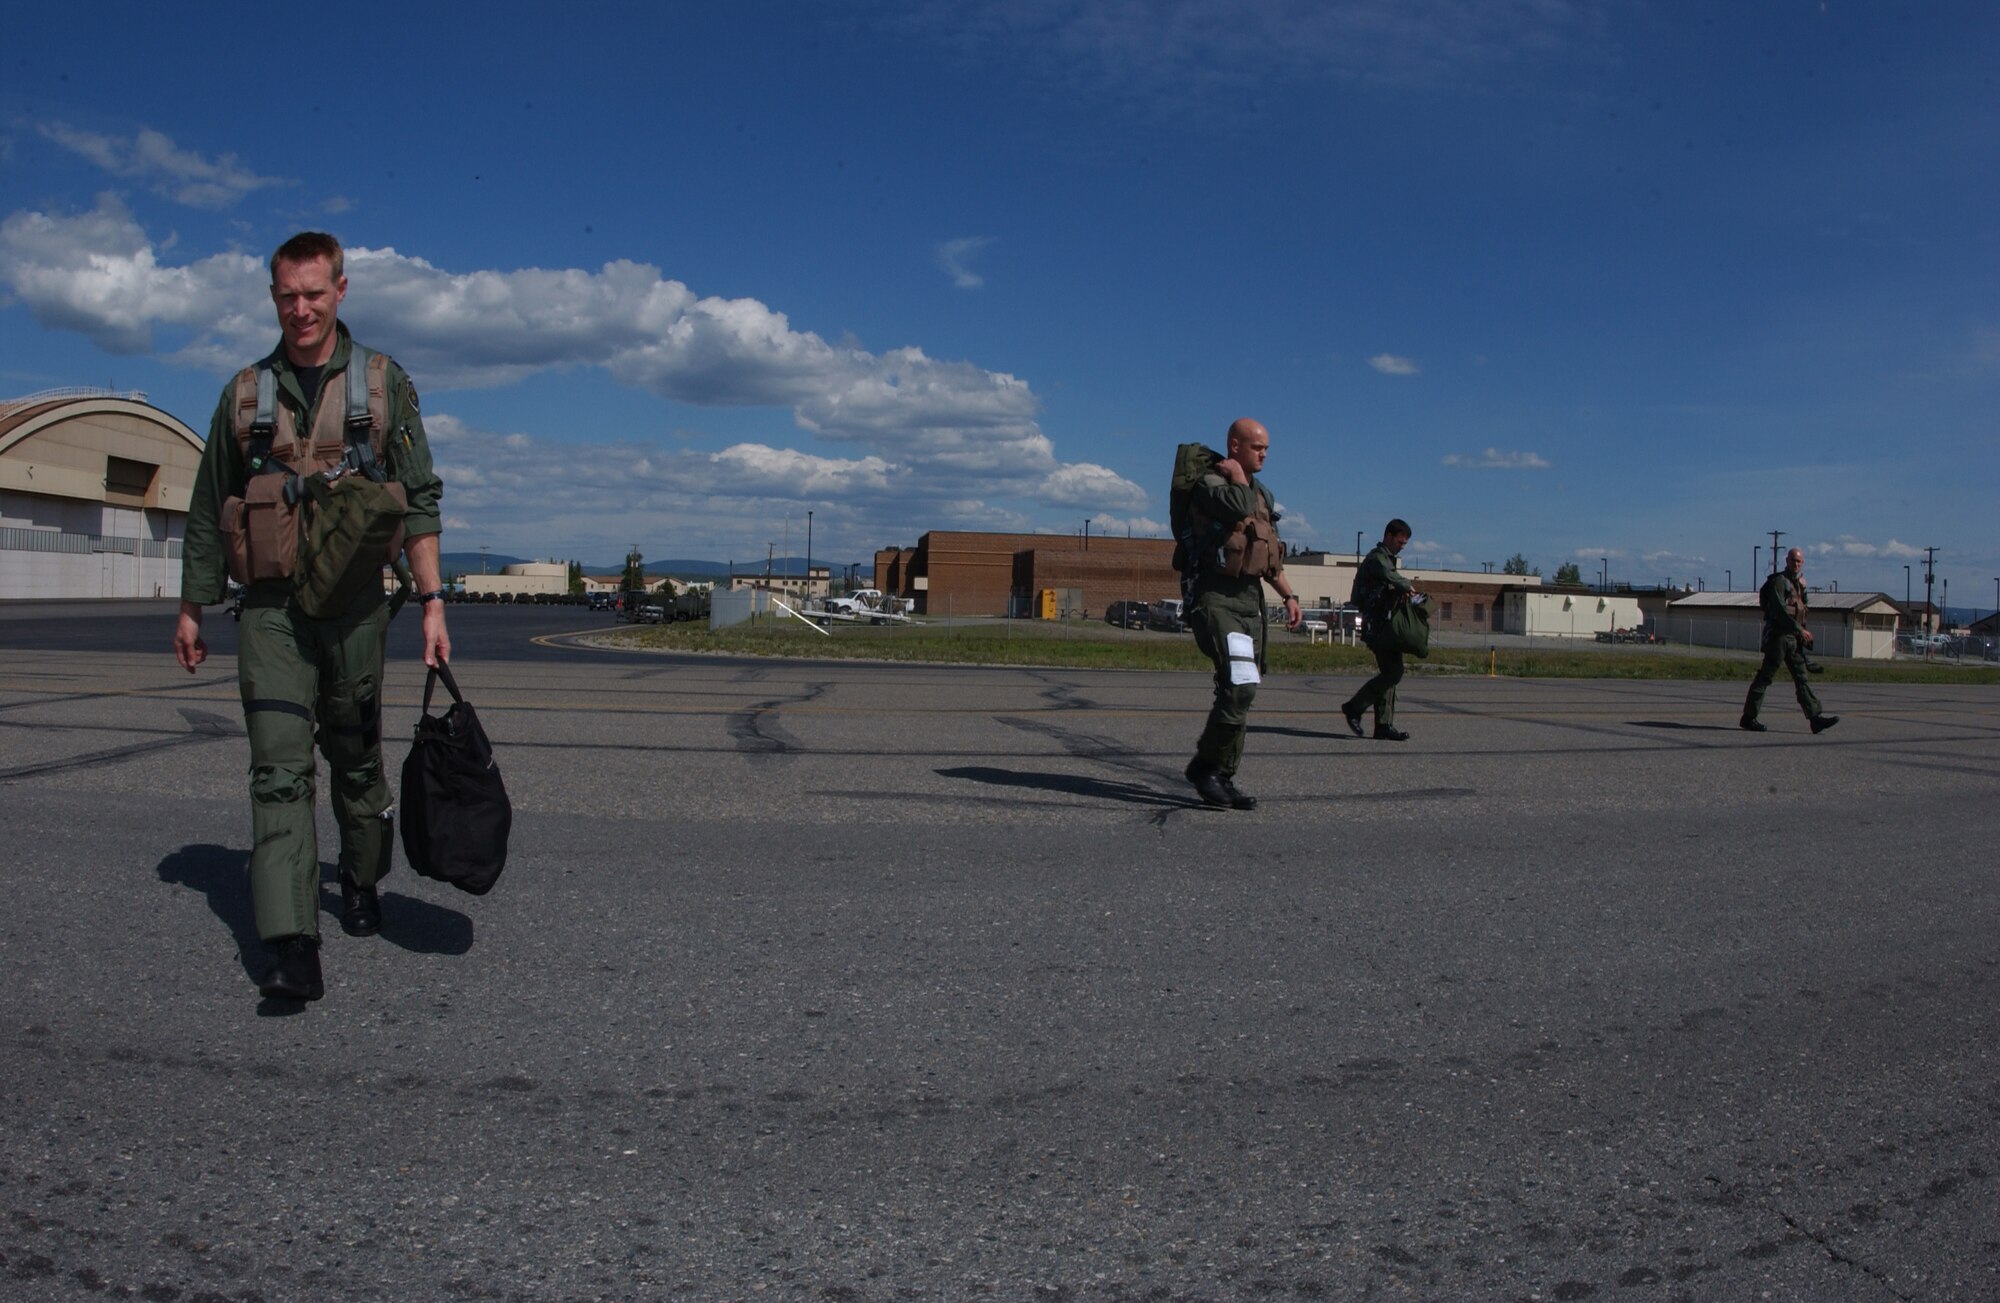 EIELSON AIR FORCE BASE, Alaska -- Four F-16 Fighting Falcon pilots from the 555th Fighter Squadron, Aviano Air Base, Italy, step to their jets prior to a mission for Red Flag-Alaska 07-2 June 4 here. RF-A 07-2 is a Pacific Air Forces-directed field training exercise for U.S. and coalition forces flown under simulated air-combat conditions. It is conducted on the Pacific Alaska Range Complex with air operations flown out of Eielson and Elmendorf Air Force Bases. (U.S. Air Force Photo by Airman 1st Class Jonathan Snyder) 